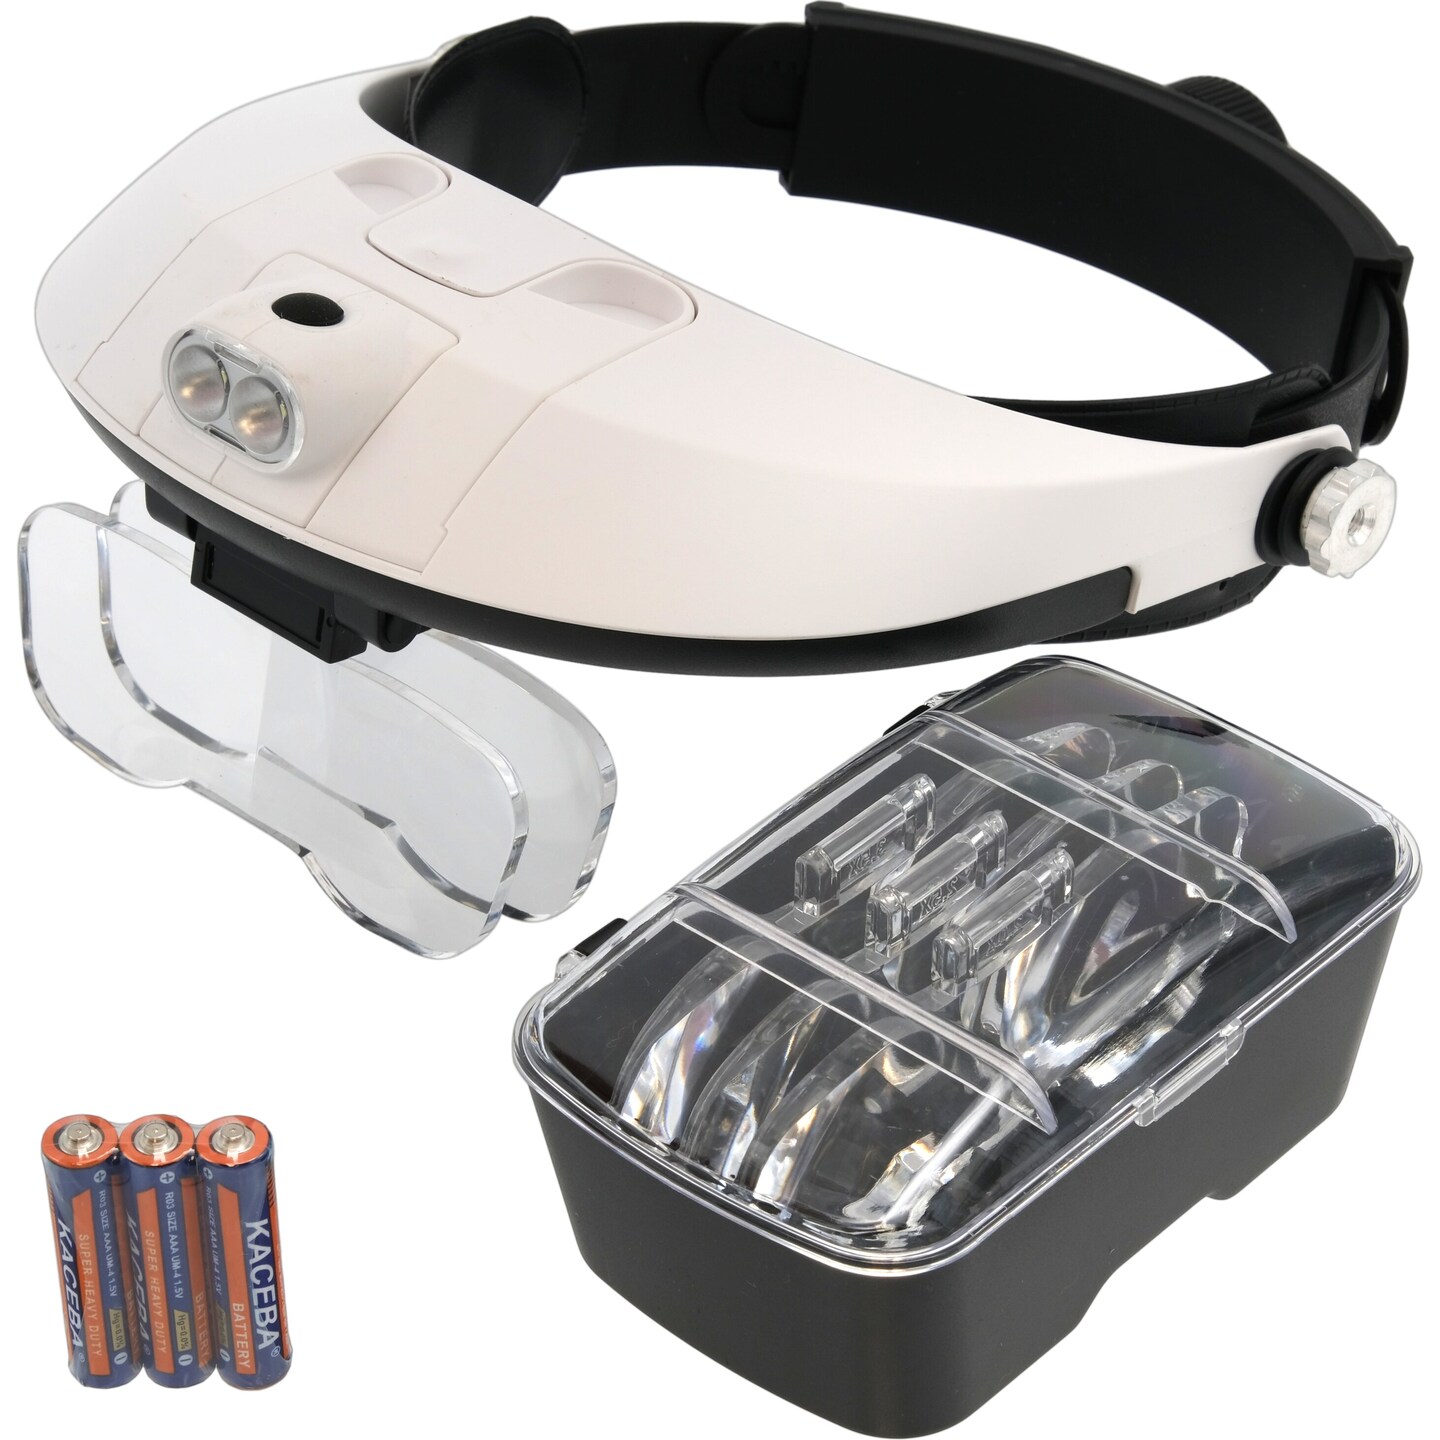 HAWK OPTICALS MG9008 2 LED Head Magnifier with Extra Lenses, White